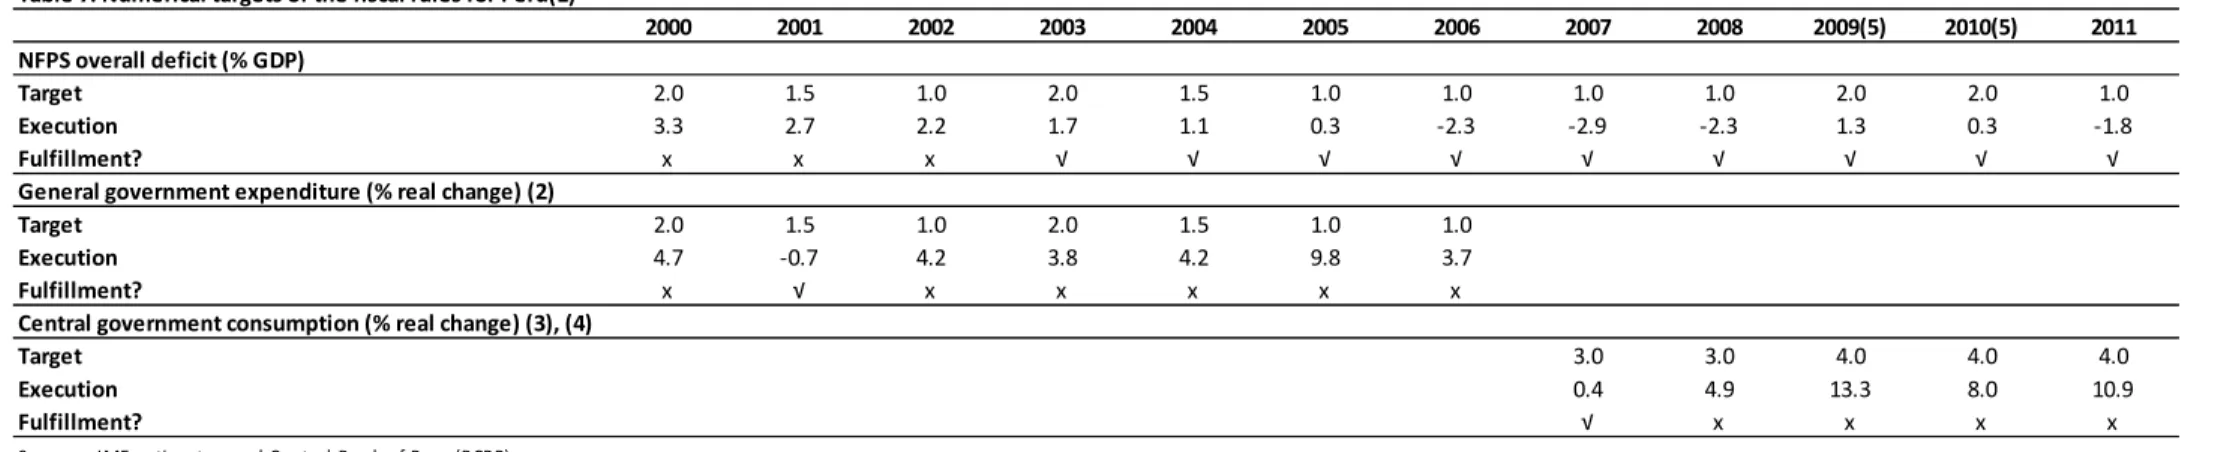 Table 7. Numerical targets of the fiscal rules for Peru(1)